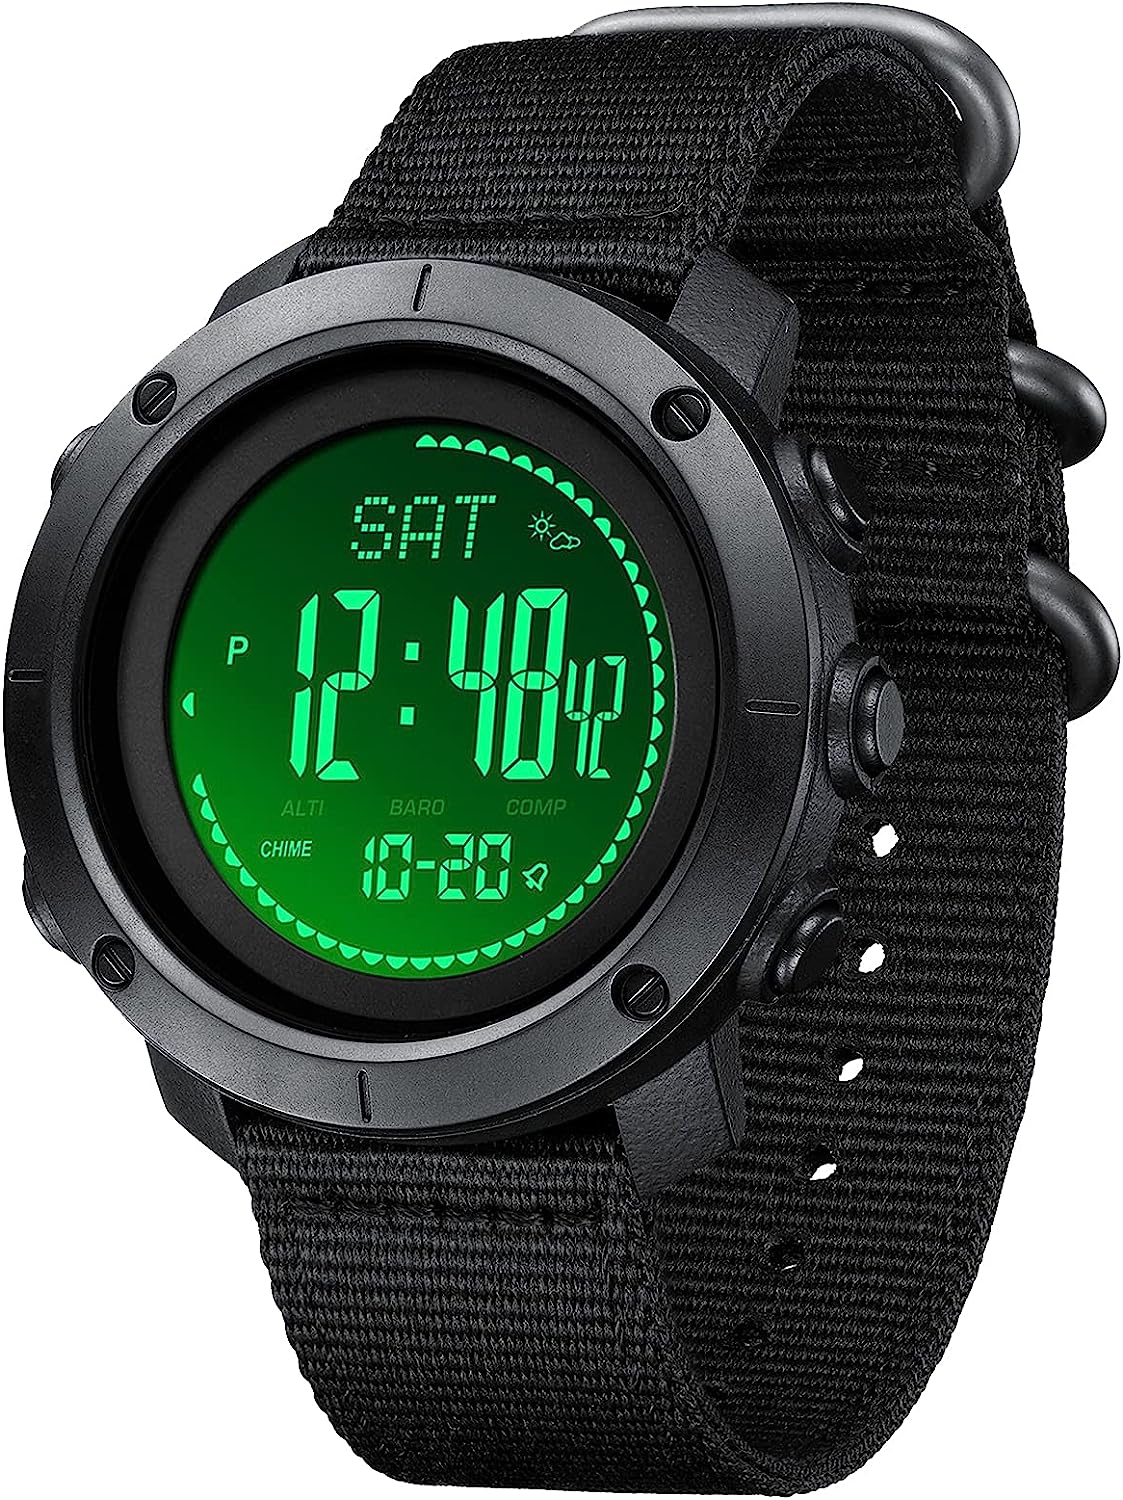 WINKONMU Military Watches with Compass Altimeter [...]